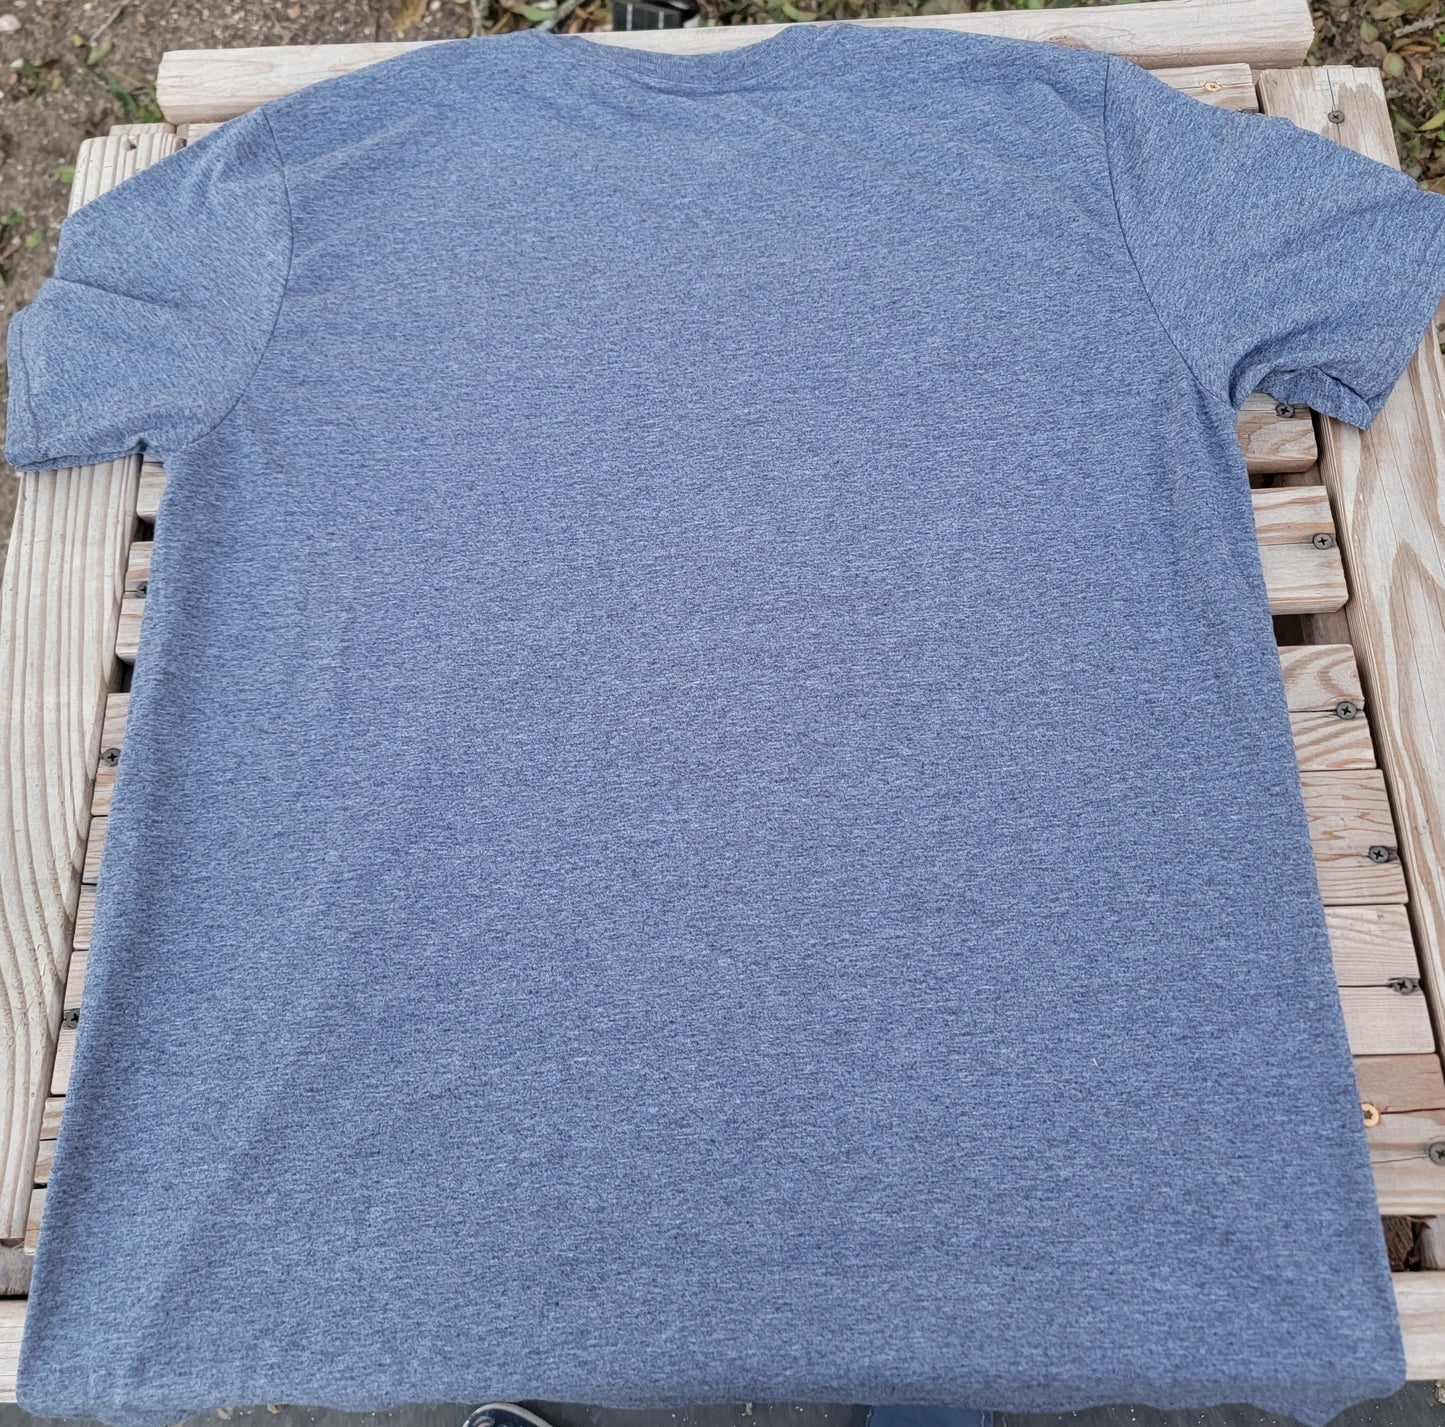 Cookie baking crew large t-shirt 
brand new large gildan softstyle ring spun gray t-shirt. shirt is in excellent condition with the original large sticker still stuck on the front.